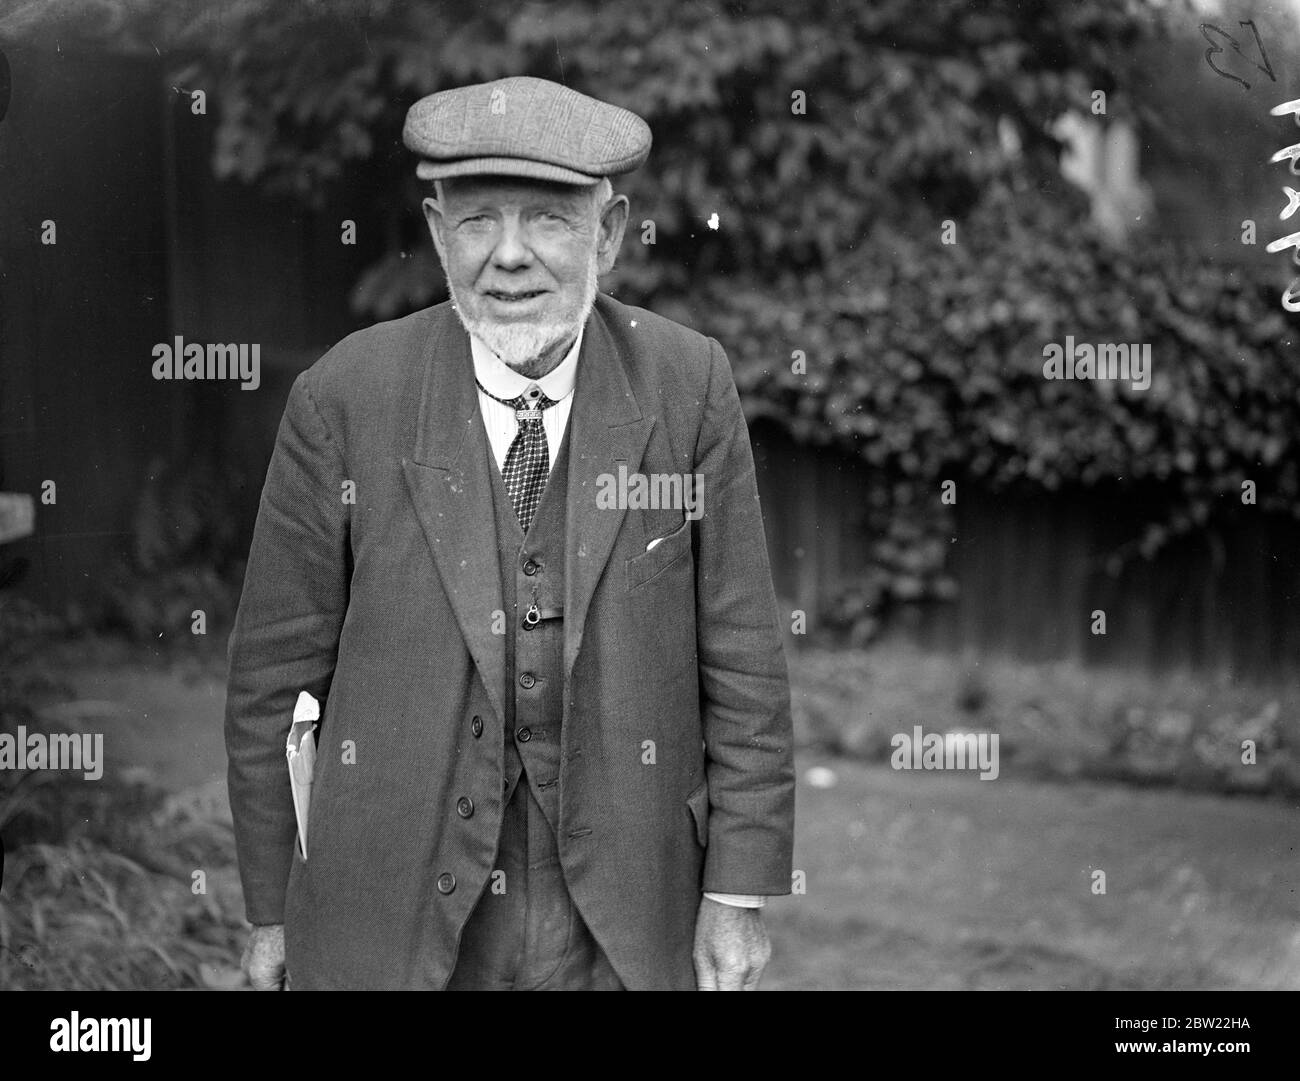 Mr. A.J Franklin who will be the first Mayor of the Newborough leaving his Bexley home with a bouquet of flowers grown in his garden. The 77-year-old market gardener who was born in the parish church bells will be the first Mayor when the town becomes a bar at the end of this month. 15 September 1937. Stock Photo